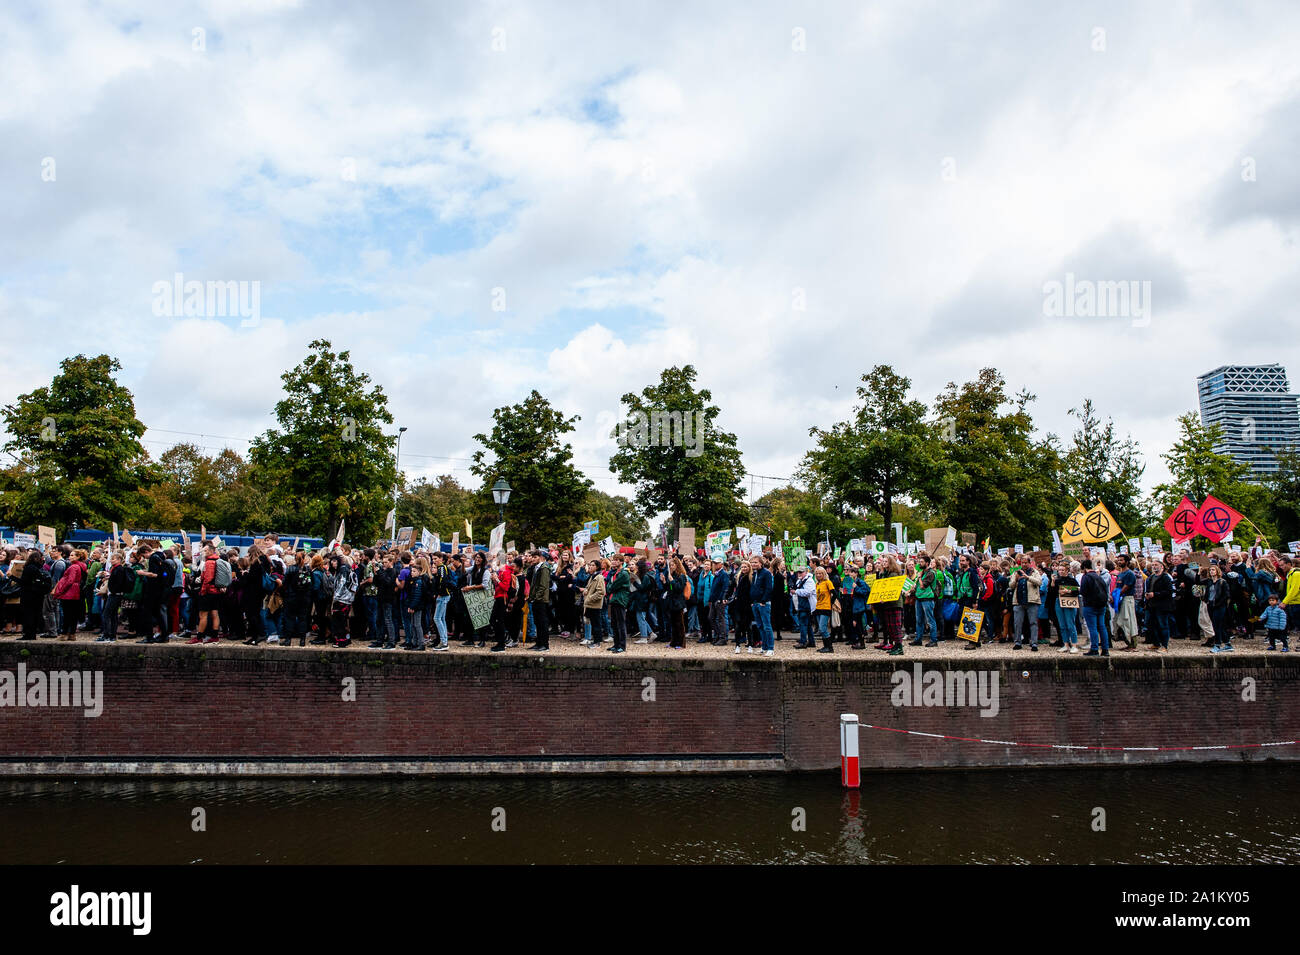 Thousands of people walking next to a canal during the demonstration.Large coalition of organizations in The Netherlands organized the climate strike, and it is part of the largest international climate mobilisation in history. Building on the successful youth strikes that started almost a year ago, thousands of people strike together for the first time to demand a liveable and just world, now and for the future. Stock Photo